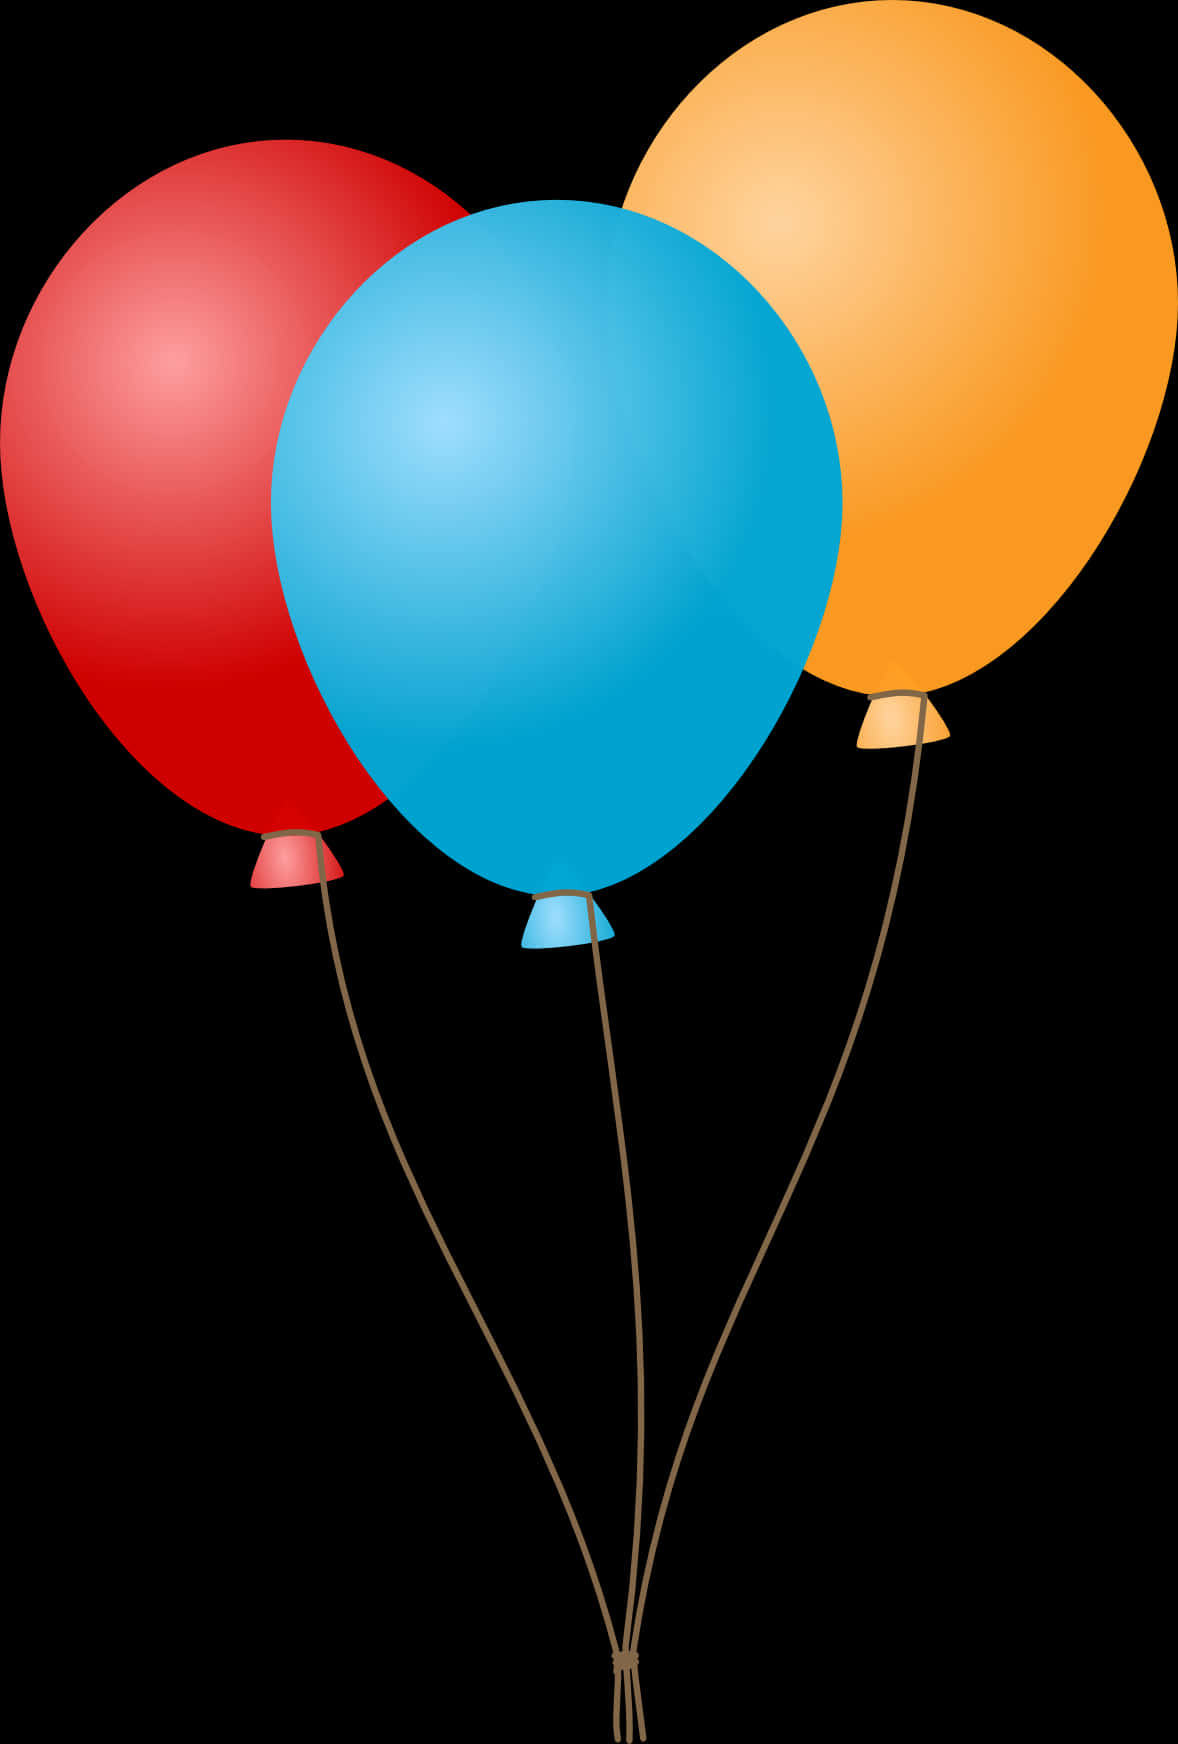 Colorful Balloonson Black Background PNG